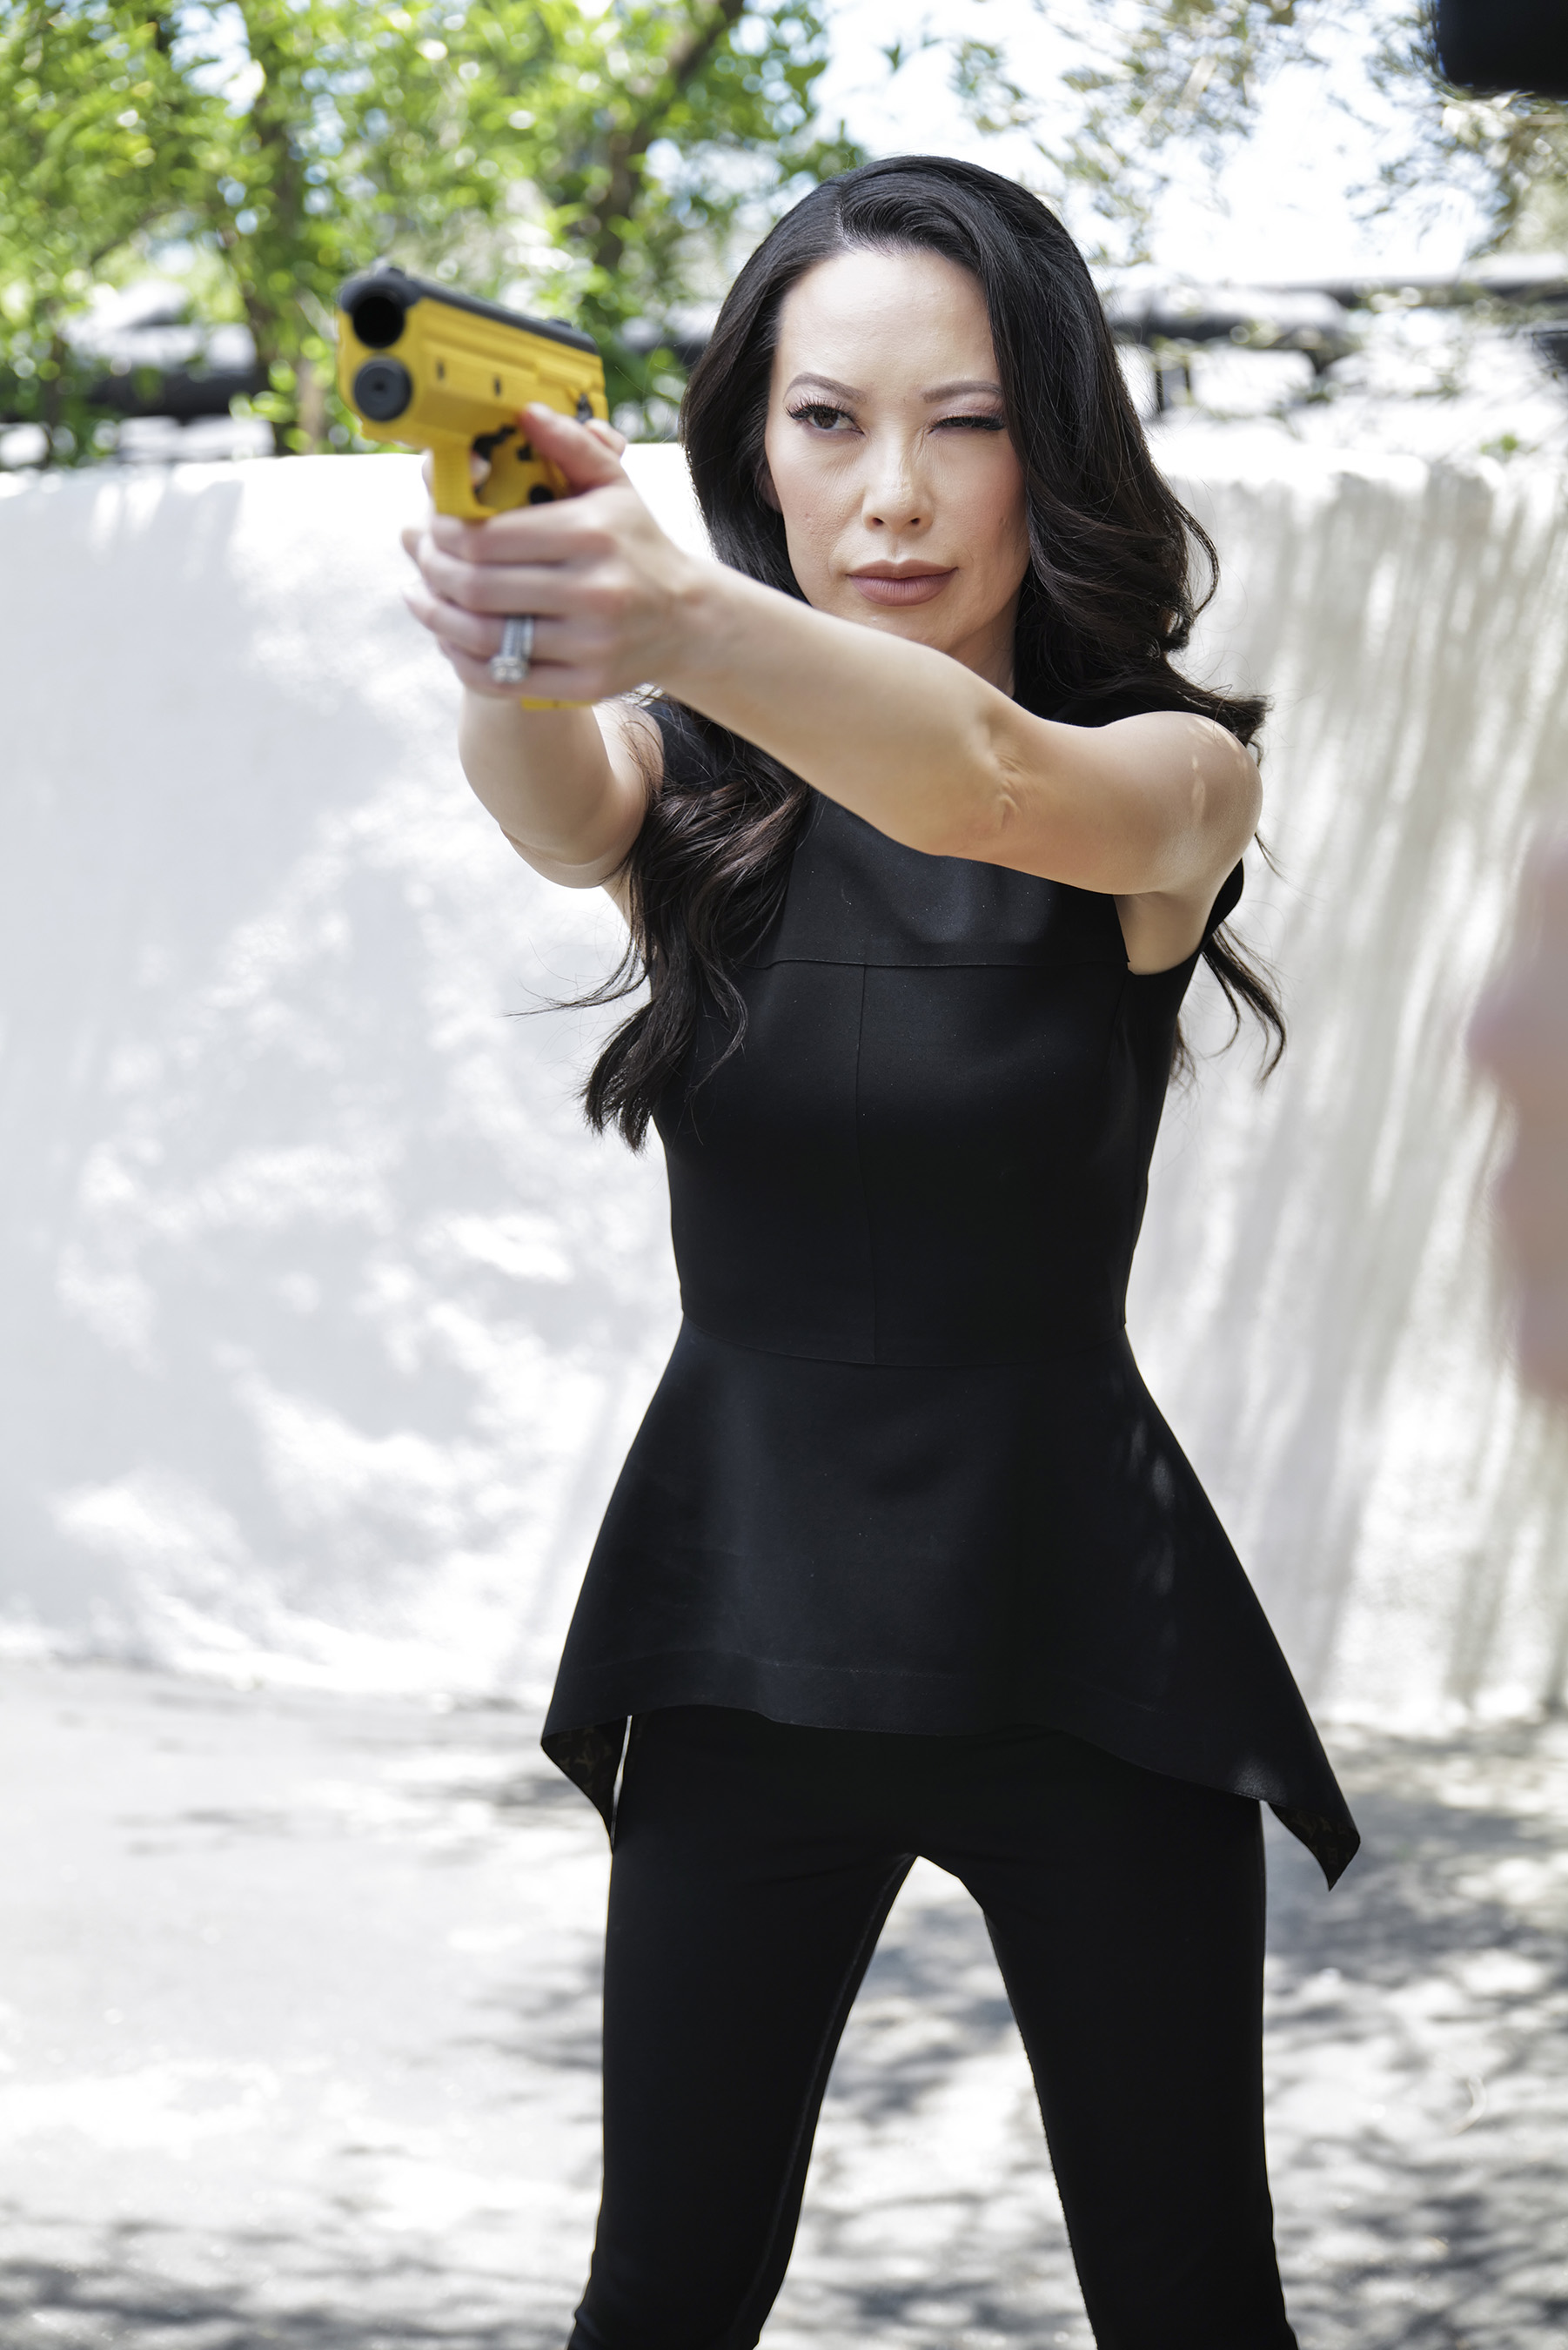 Woman practicing with gun